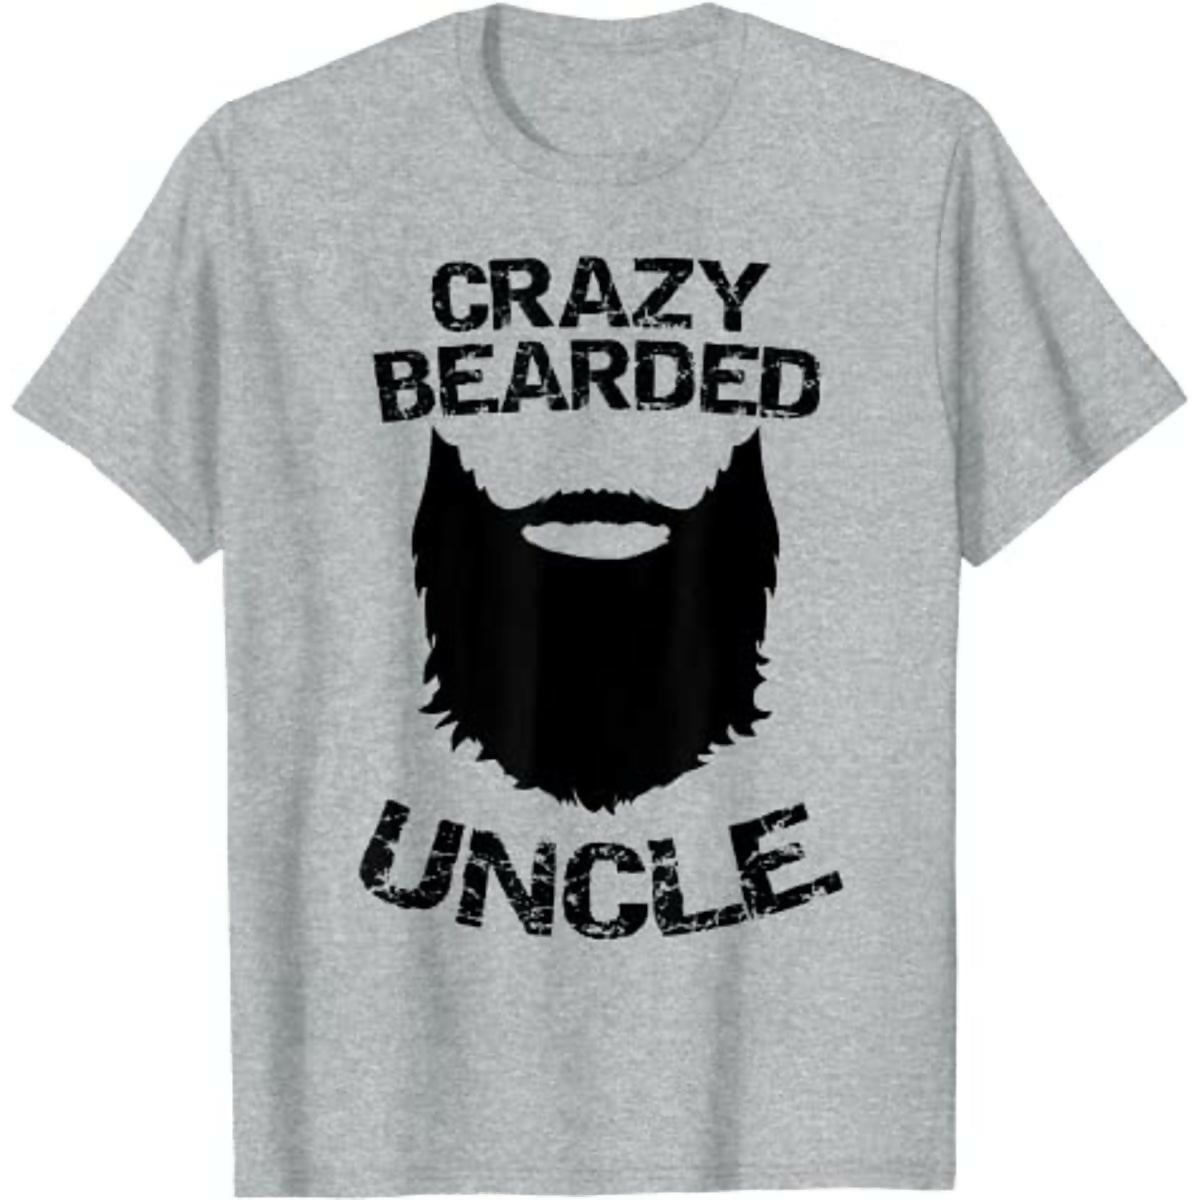 Khanani's Crazy bearded uncle cotton tshirts for men - ValueBox